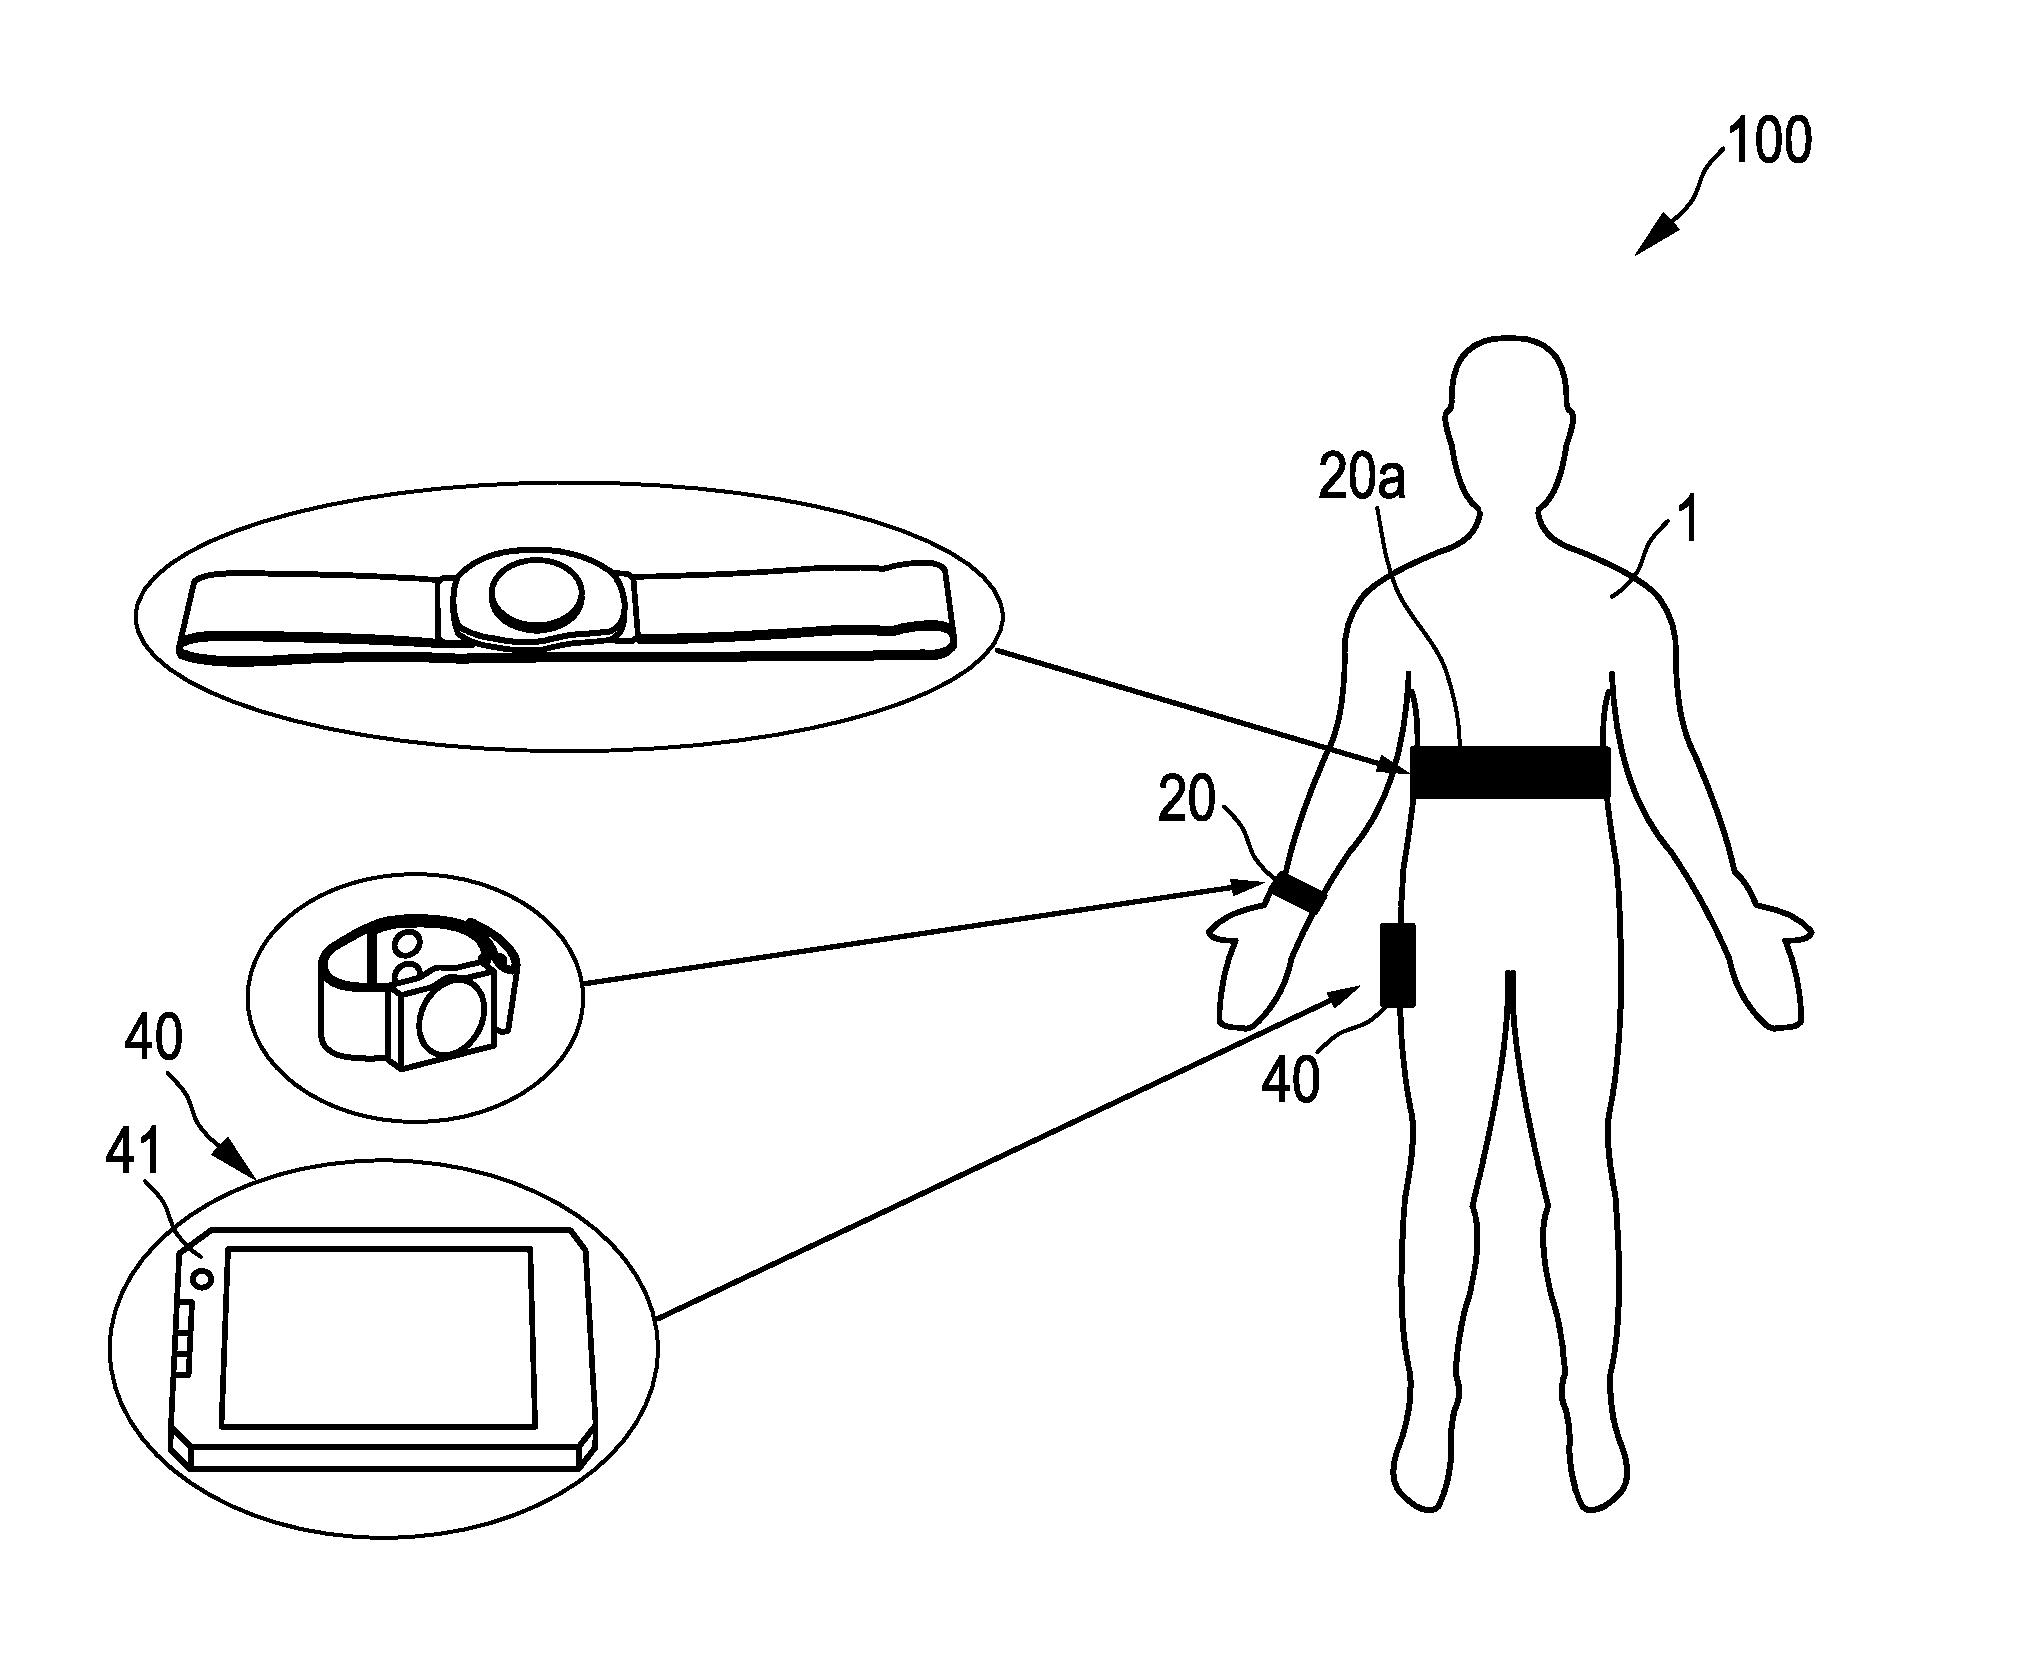 Stress-measuring device and method